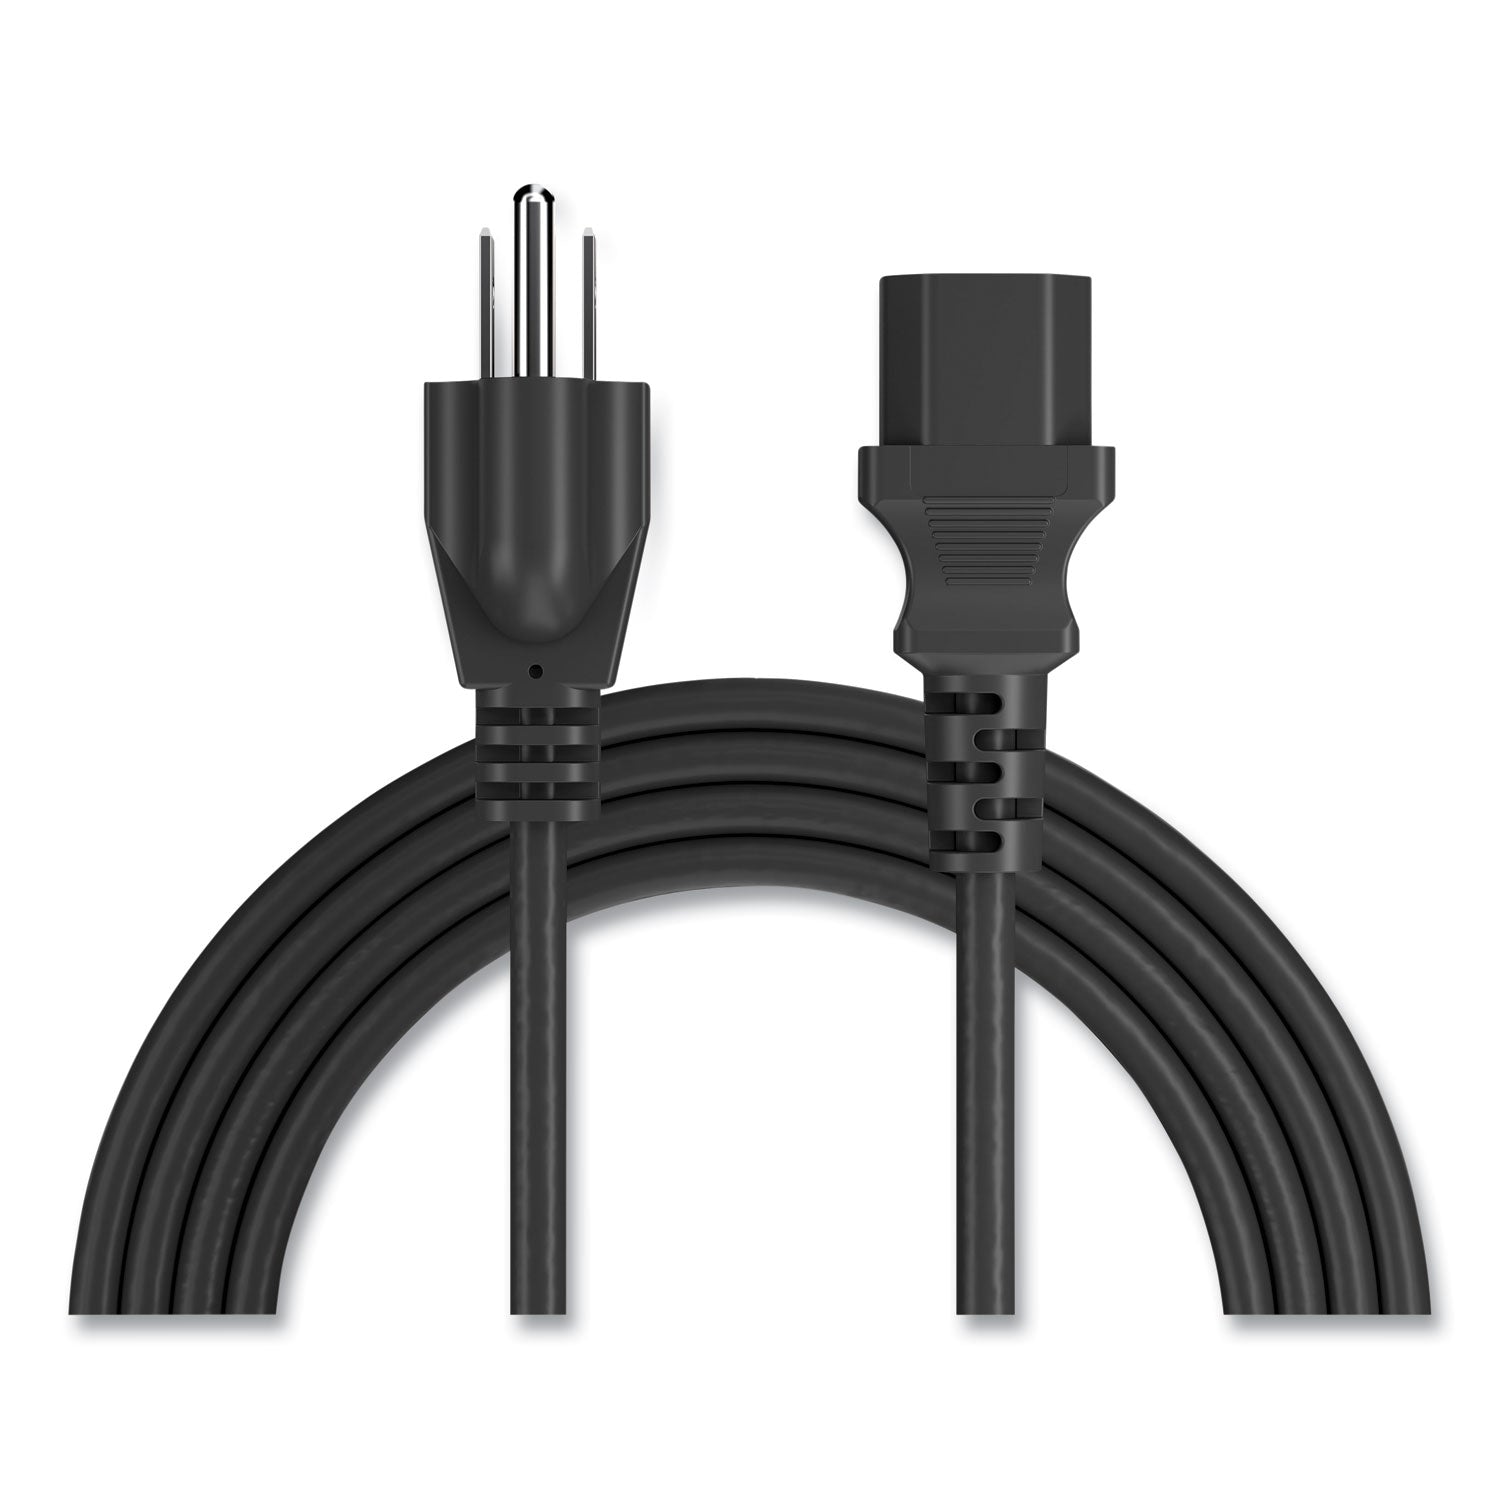 ac-replacement-power-cord-black_nxt24400019 - 3